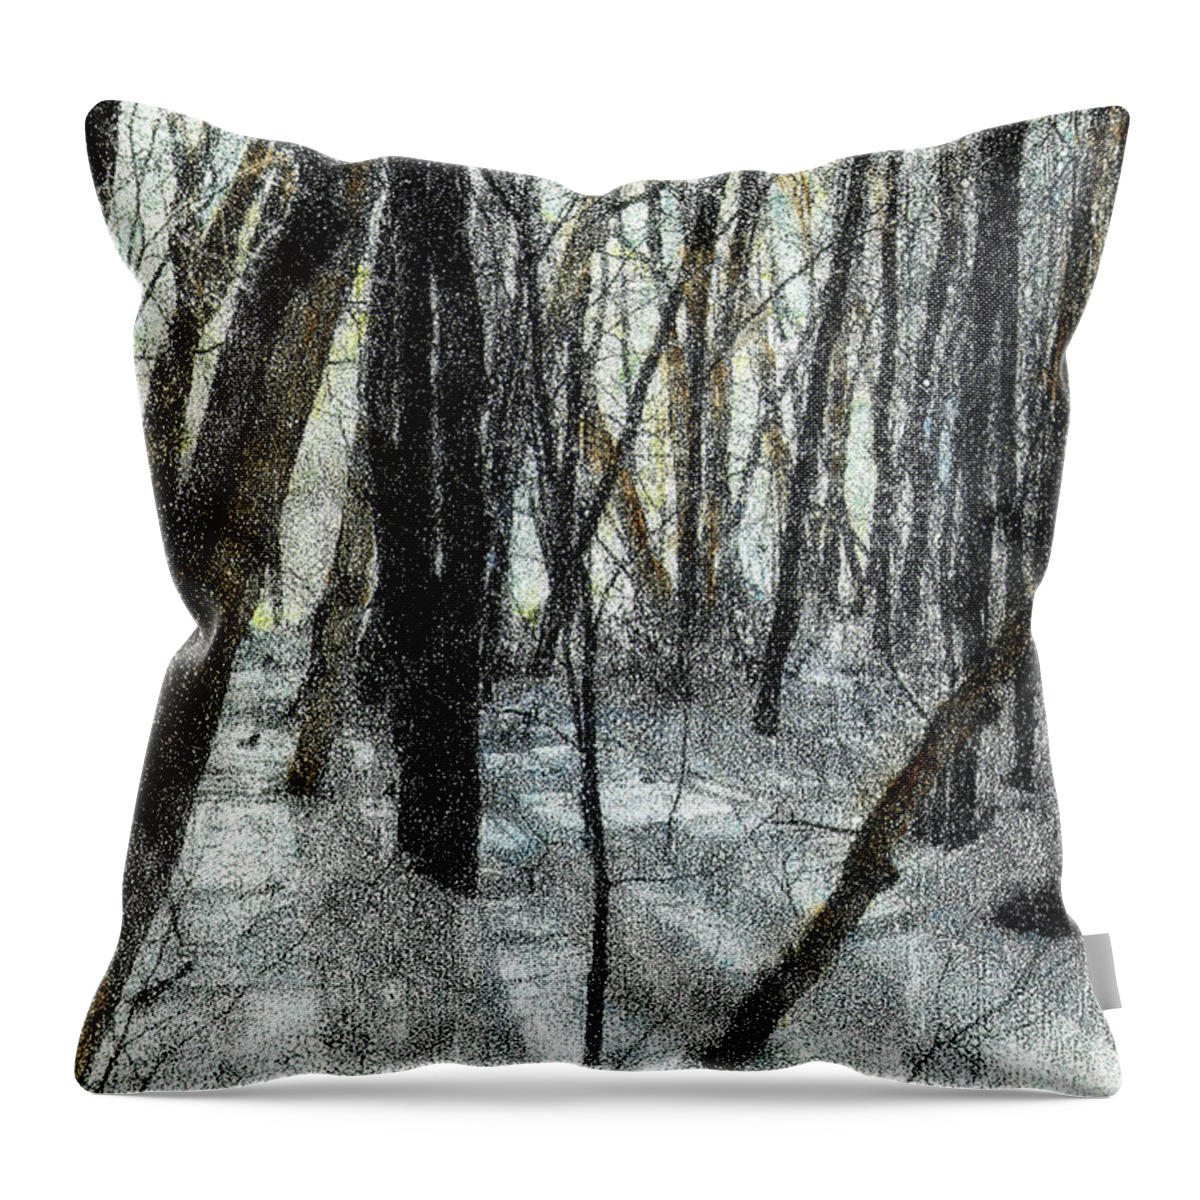 Winter Throw Pillow featuring the photograph Winter Shadows by Wayne King